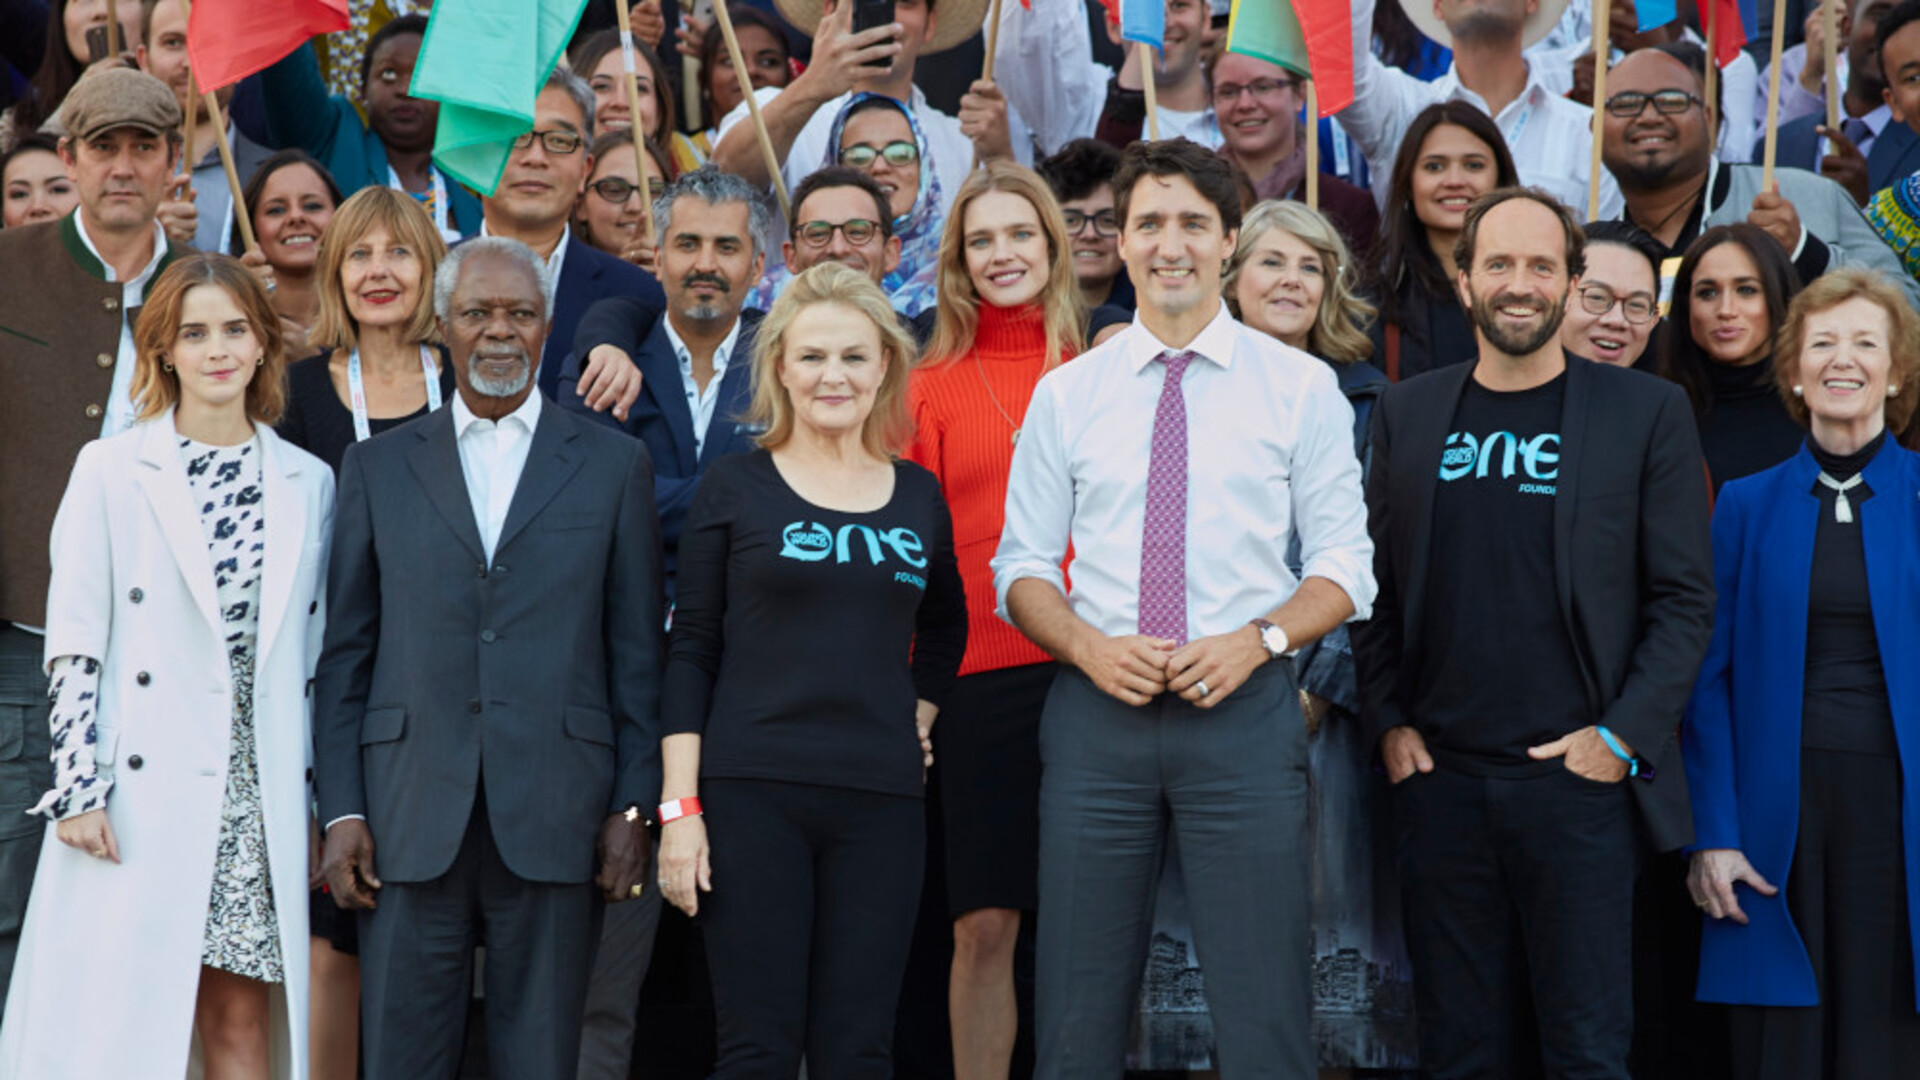 Group photo of smiling OYW Co-Founders, celebrities, dignitaries, flag bearers 